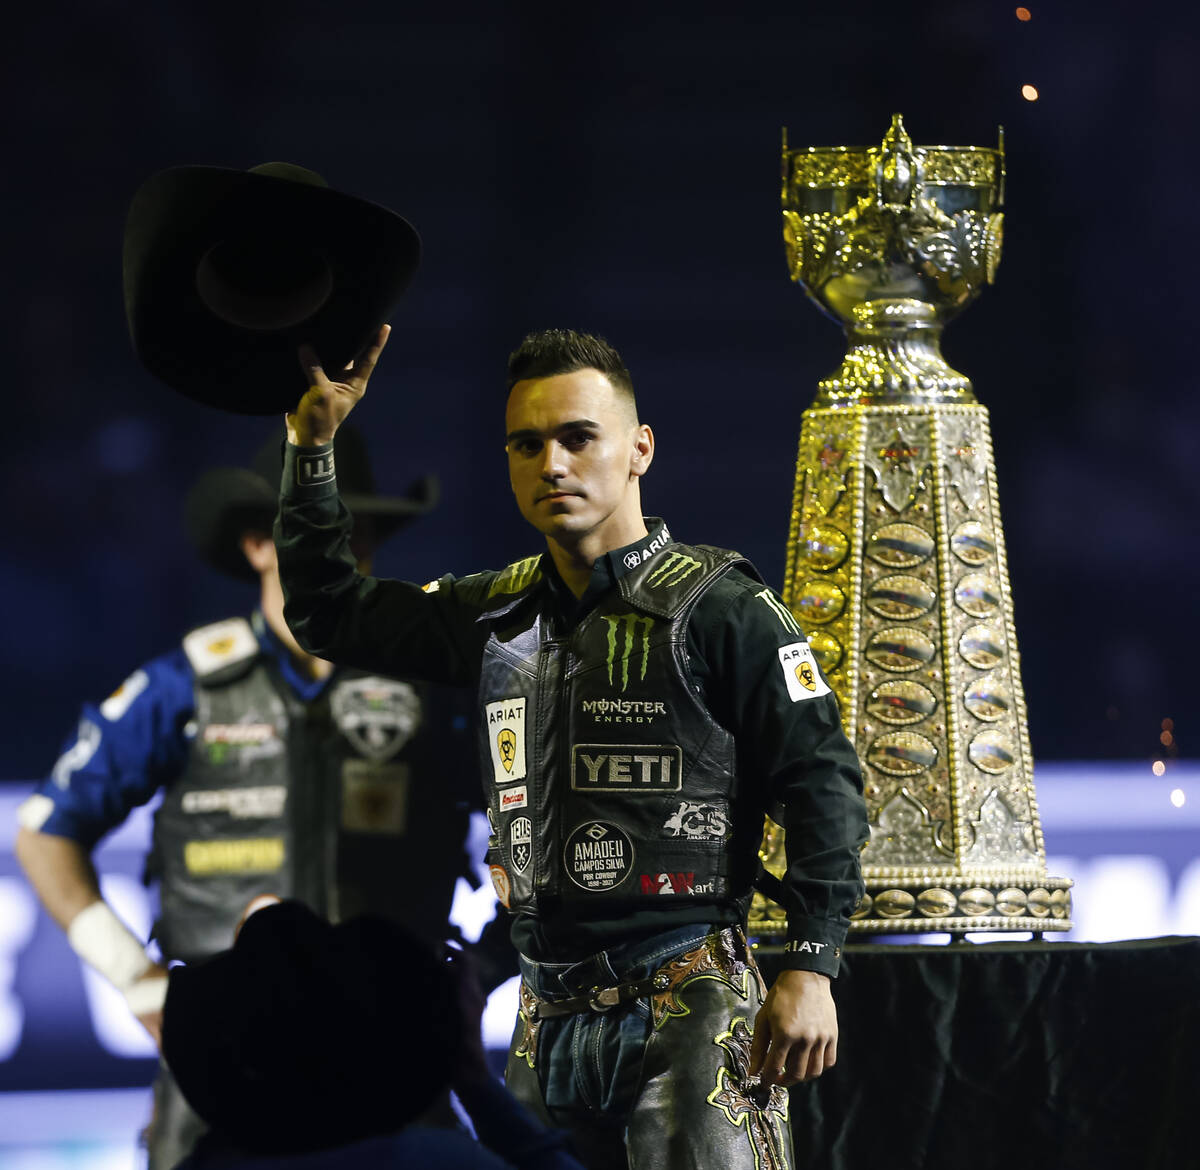 Jose Vitor Leme is introduced during the Professional Bull Riders World Finals at T-Mobile Aren ...